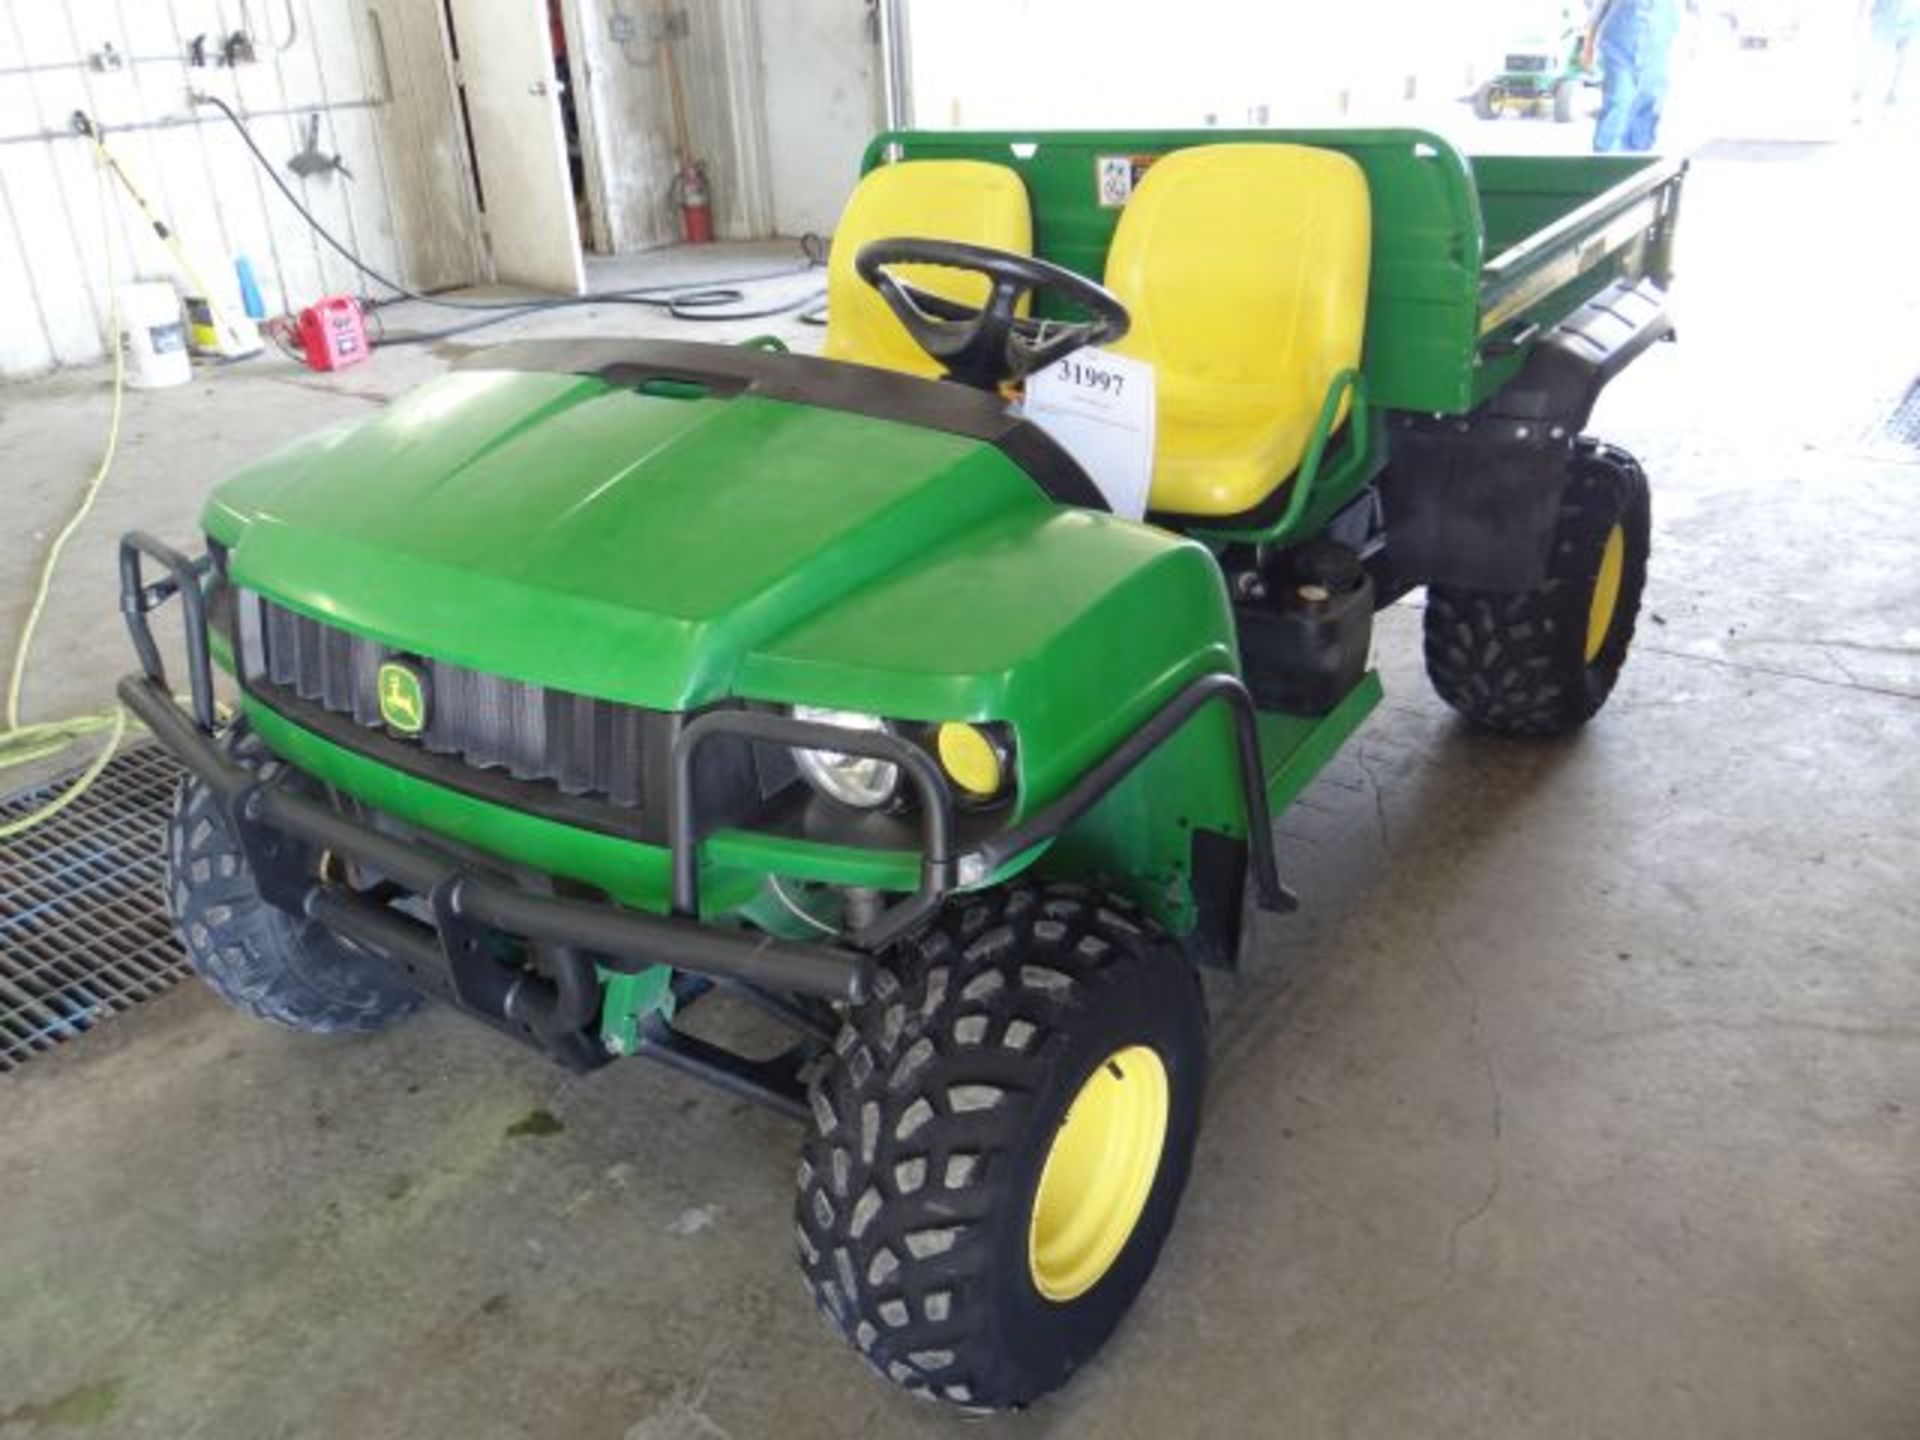 Lot 31997 - 2004 JD HPX Gator 710 hrs, 20hp, Kawasaki Water Cooled, 4wd, Extreme Terrain Tires,